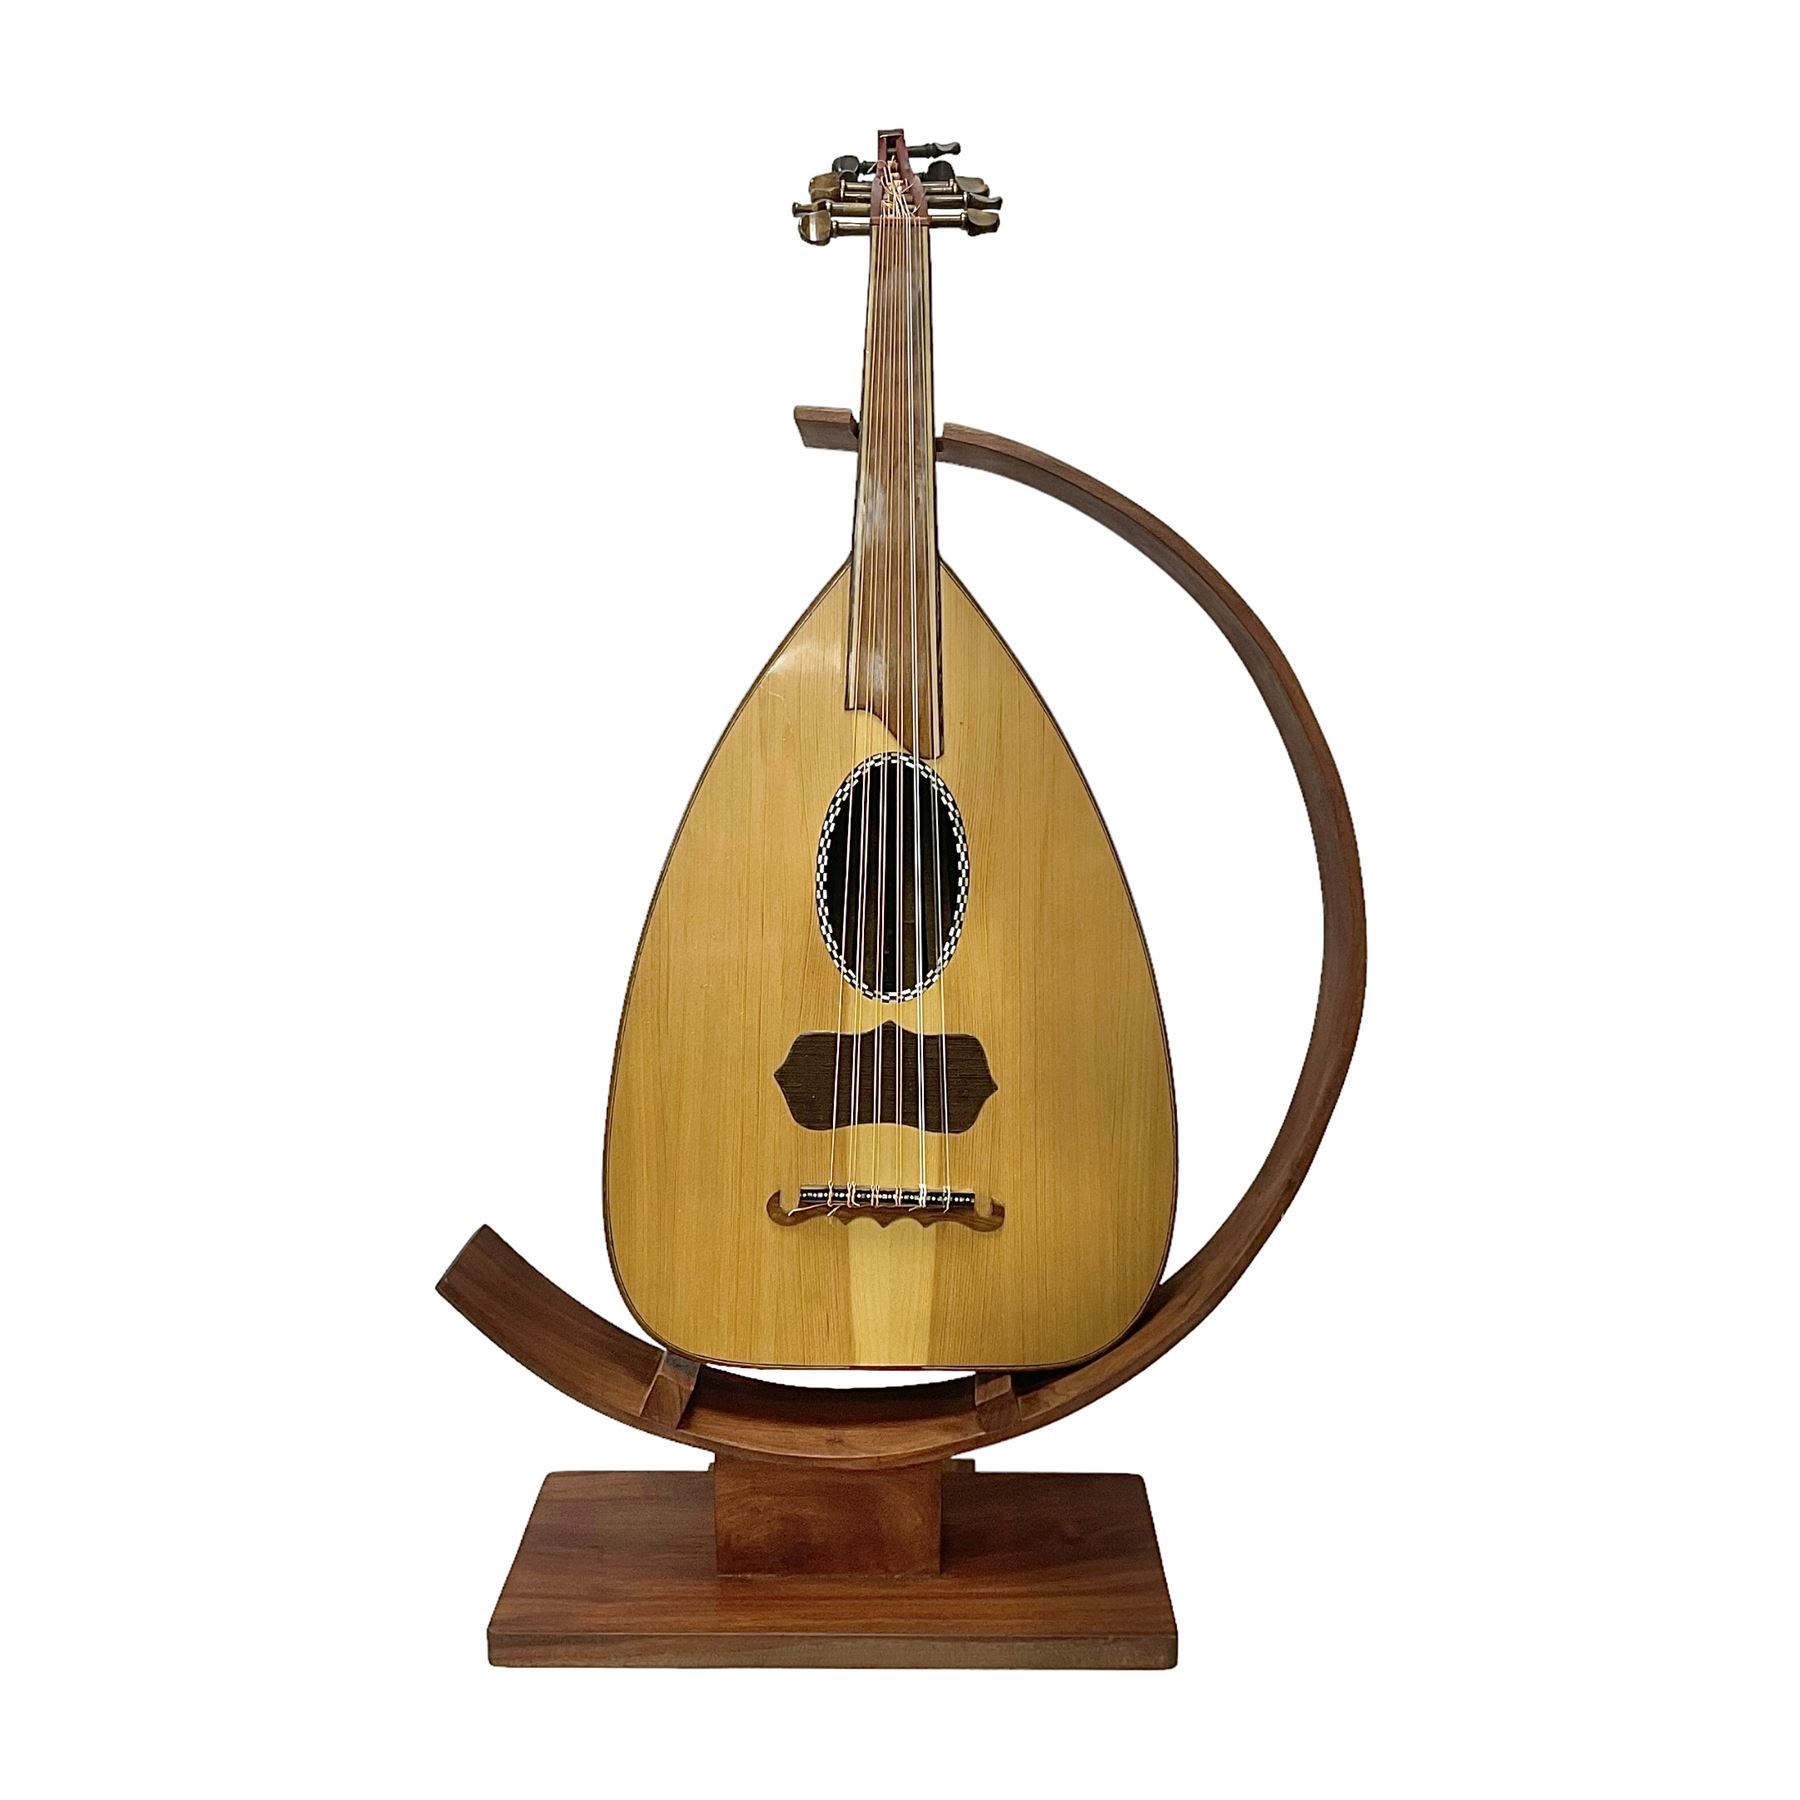 20th century Middle Eastern six string lute with a segmented back and a purpose designed hardwood st